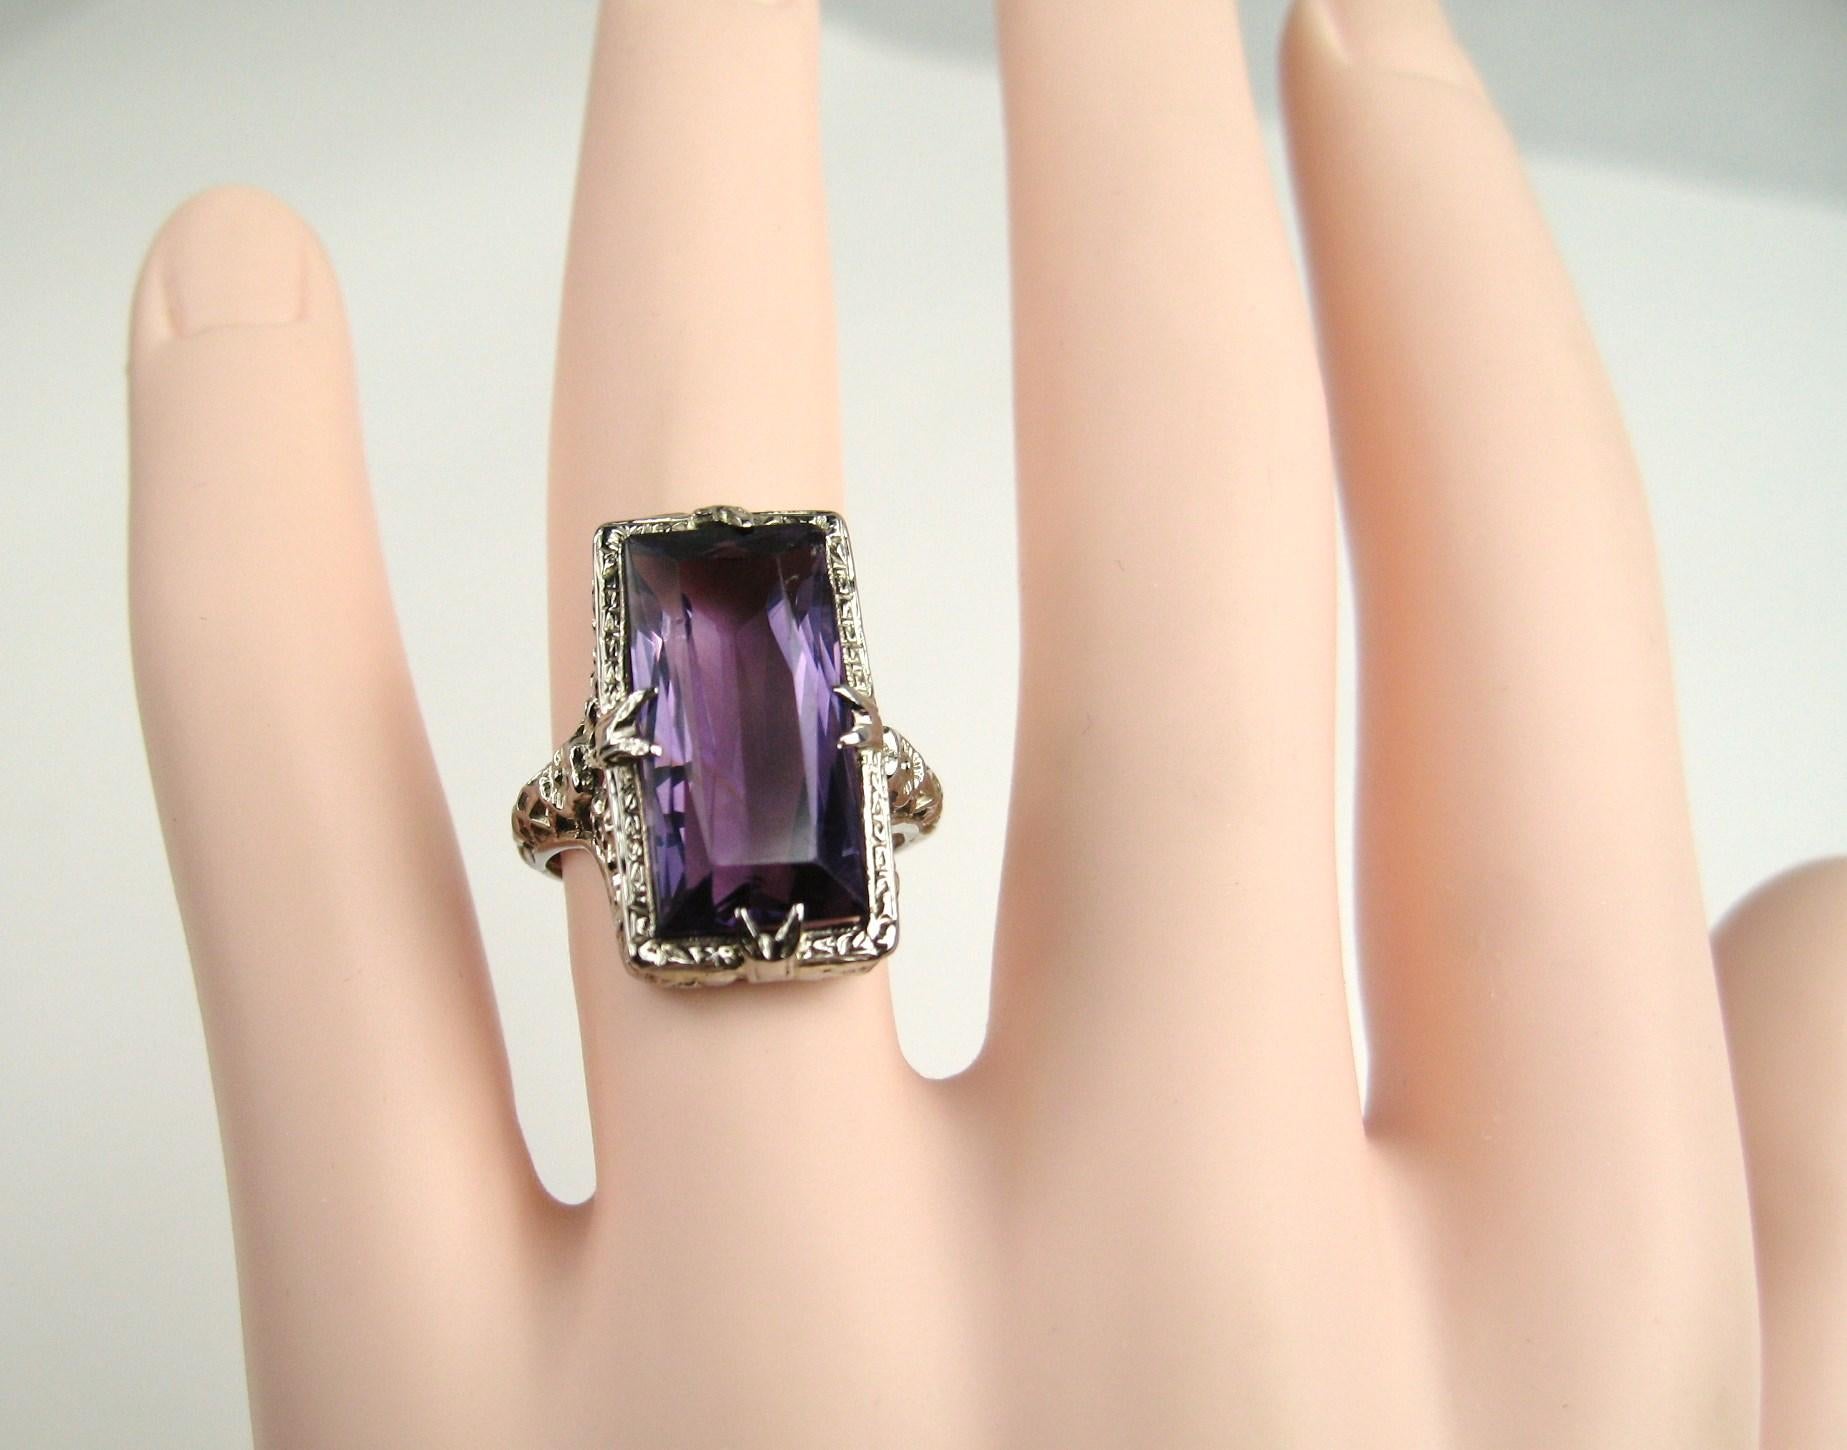 Lovey Large Amethyst 18k white gold Art Deco ring. Deep purple amethyst, with a stunningly crafted detailed filigree setting. Large faceted amethyst stone measuring approximately 7.45 carats. This would make a wonderful engagement ring. The ring is